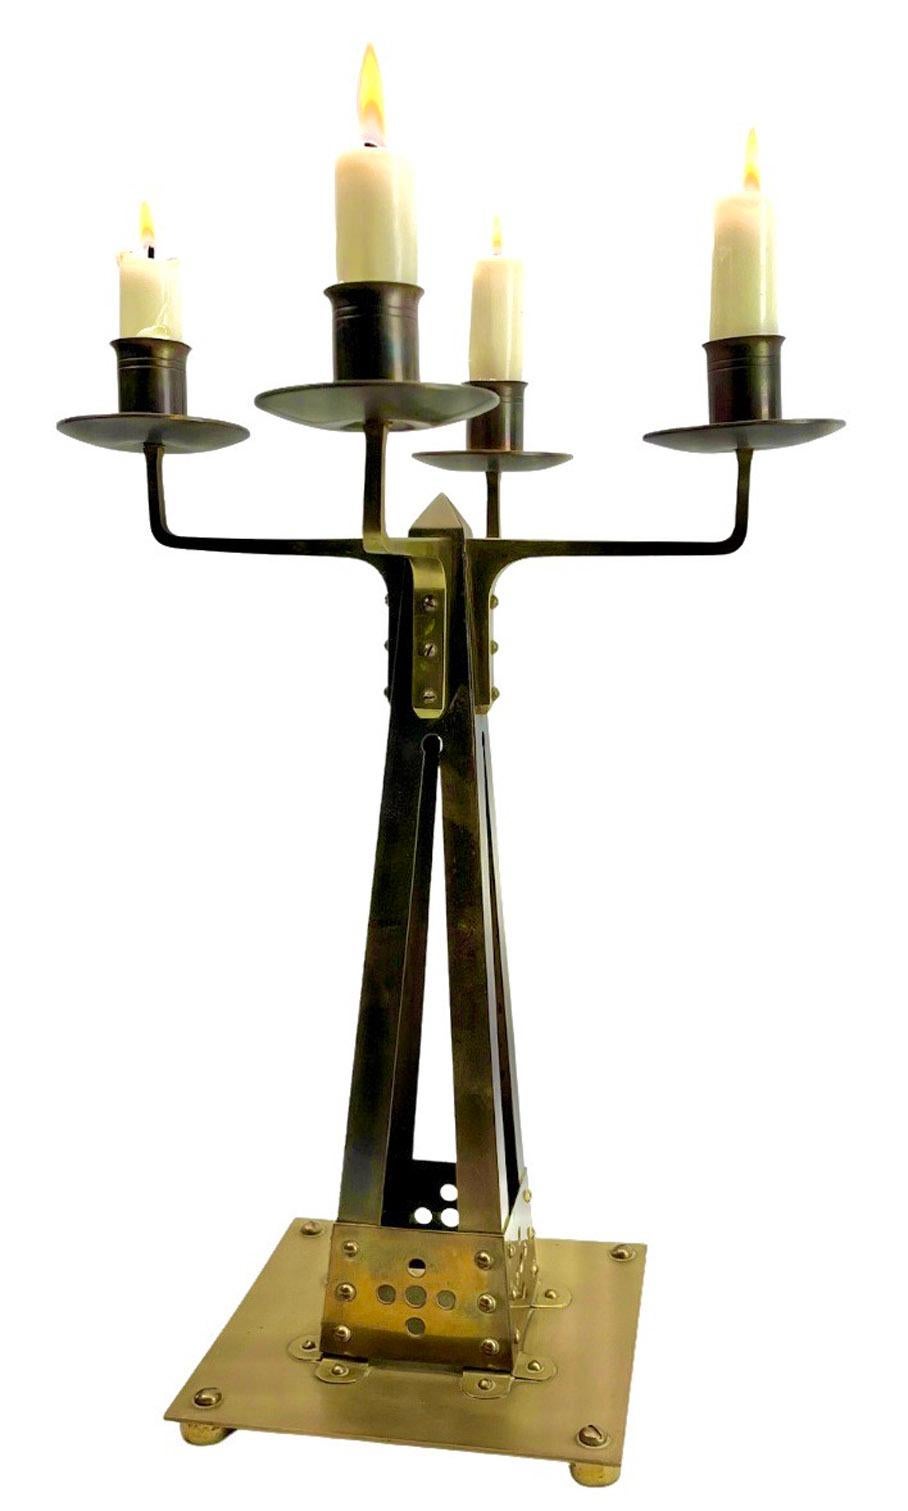 J.K.C Sneltjes Haarlem Dutch Large Arts & Crafts Copper and Brass Candleholder

Yellow copper four-light candlestick, made by Sneltjes in Haarlem in ca. 1910

The base, and the upright candle holder is in brass. The square base has a pierced design